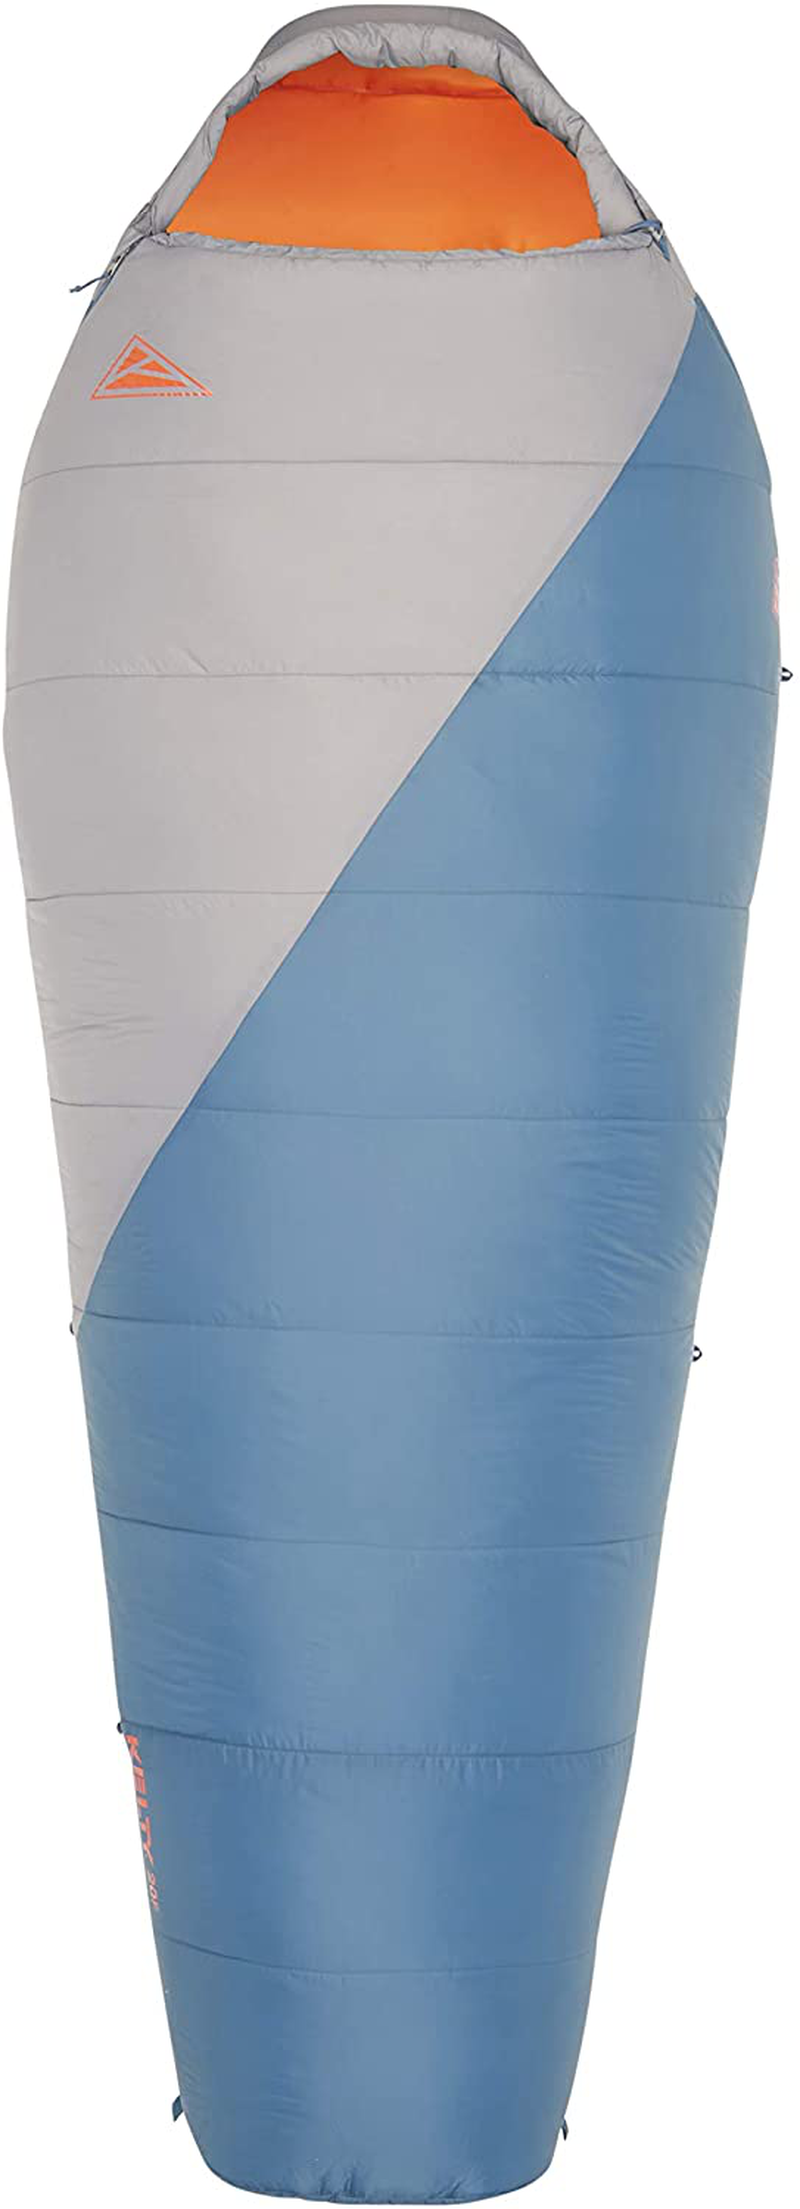 Kelty Cosmic Synthetic Fill 20 Degree Backpacking Sleeping Bag – Compression Straps, Stuff Sack Included Sporting Goods > Outdoor Recreation > Camping & Hiking > Sleeping BagsSporting Goods > Outdoor Recreation > Camping & Hiking > Sleeping Bags Kelty Tapestry Blue Long 